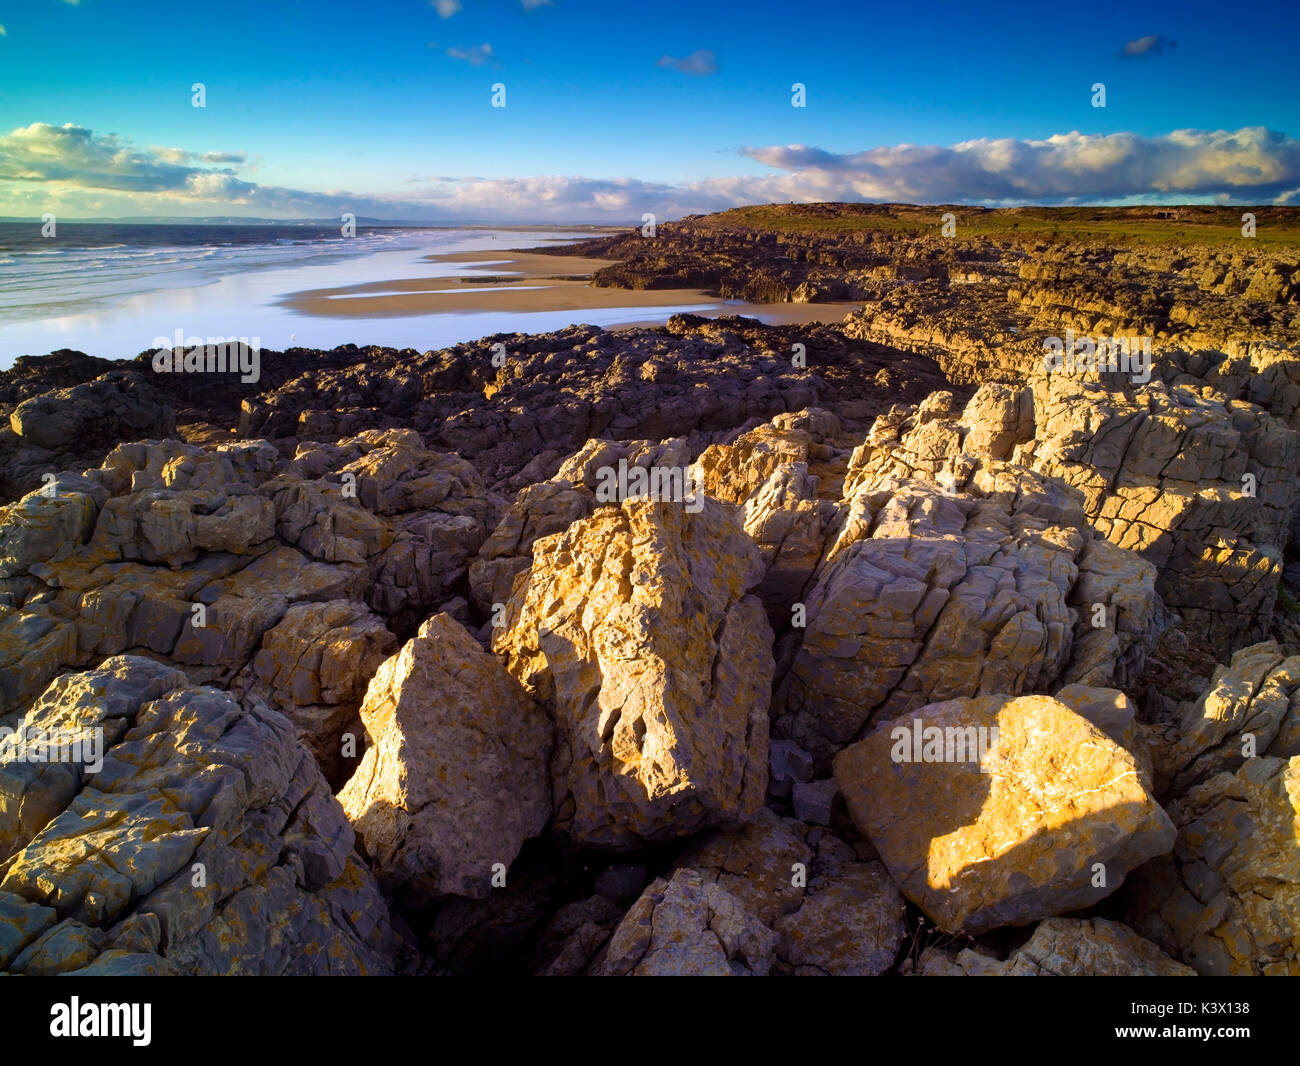 An evening view of Rest Bay, Porthcawl, South Wales, UK Stock Photo